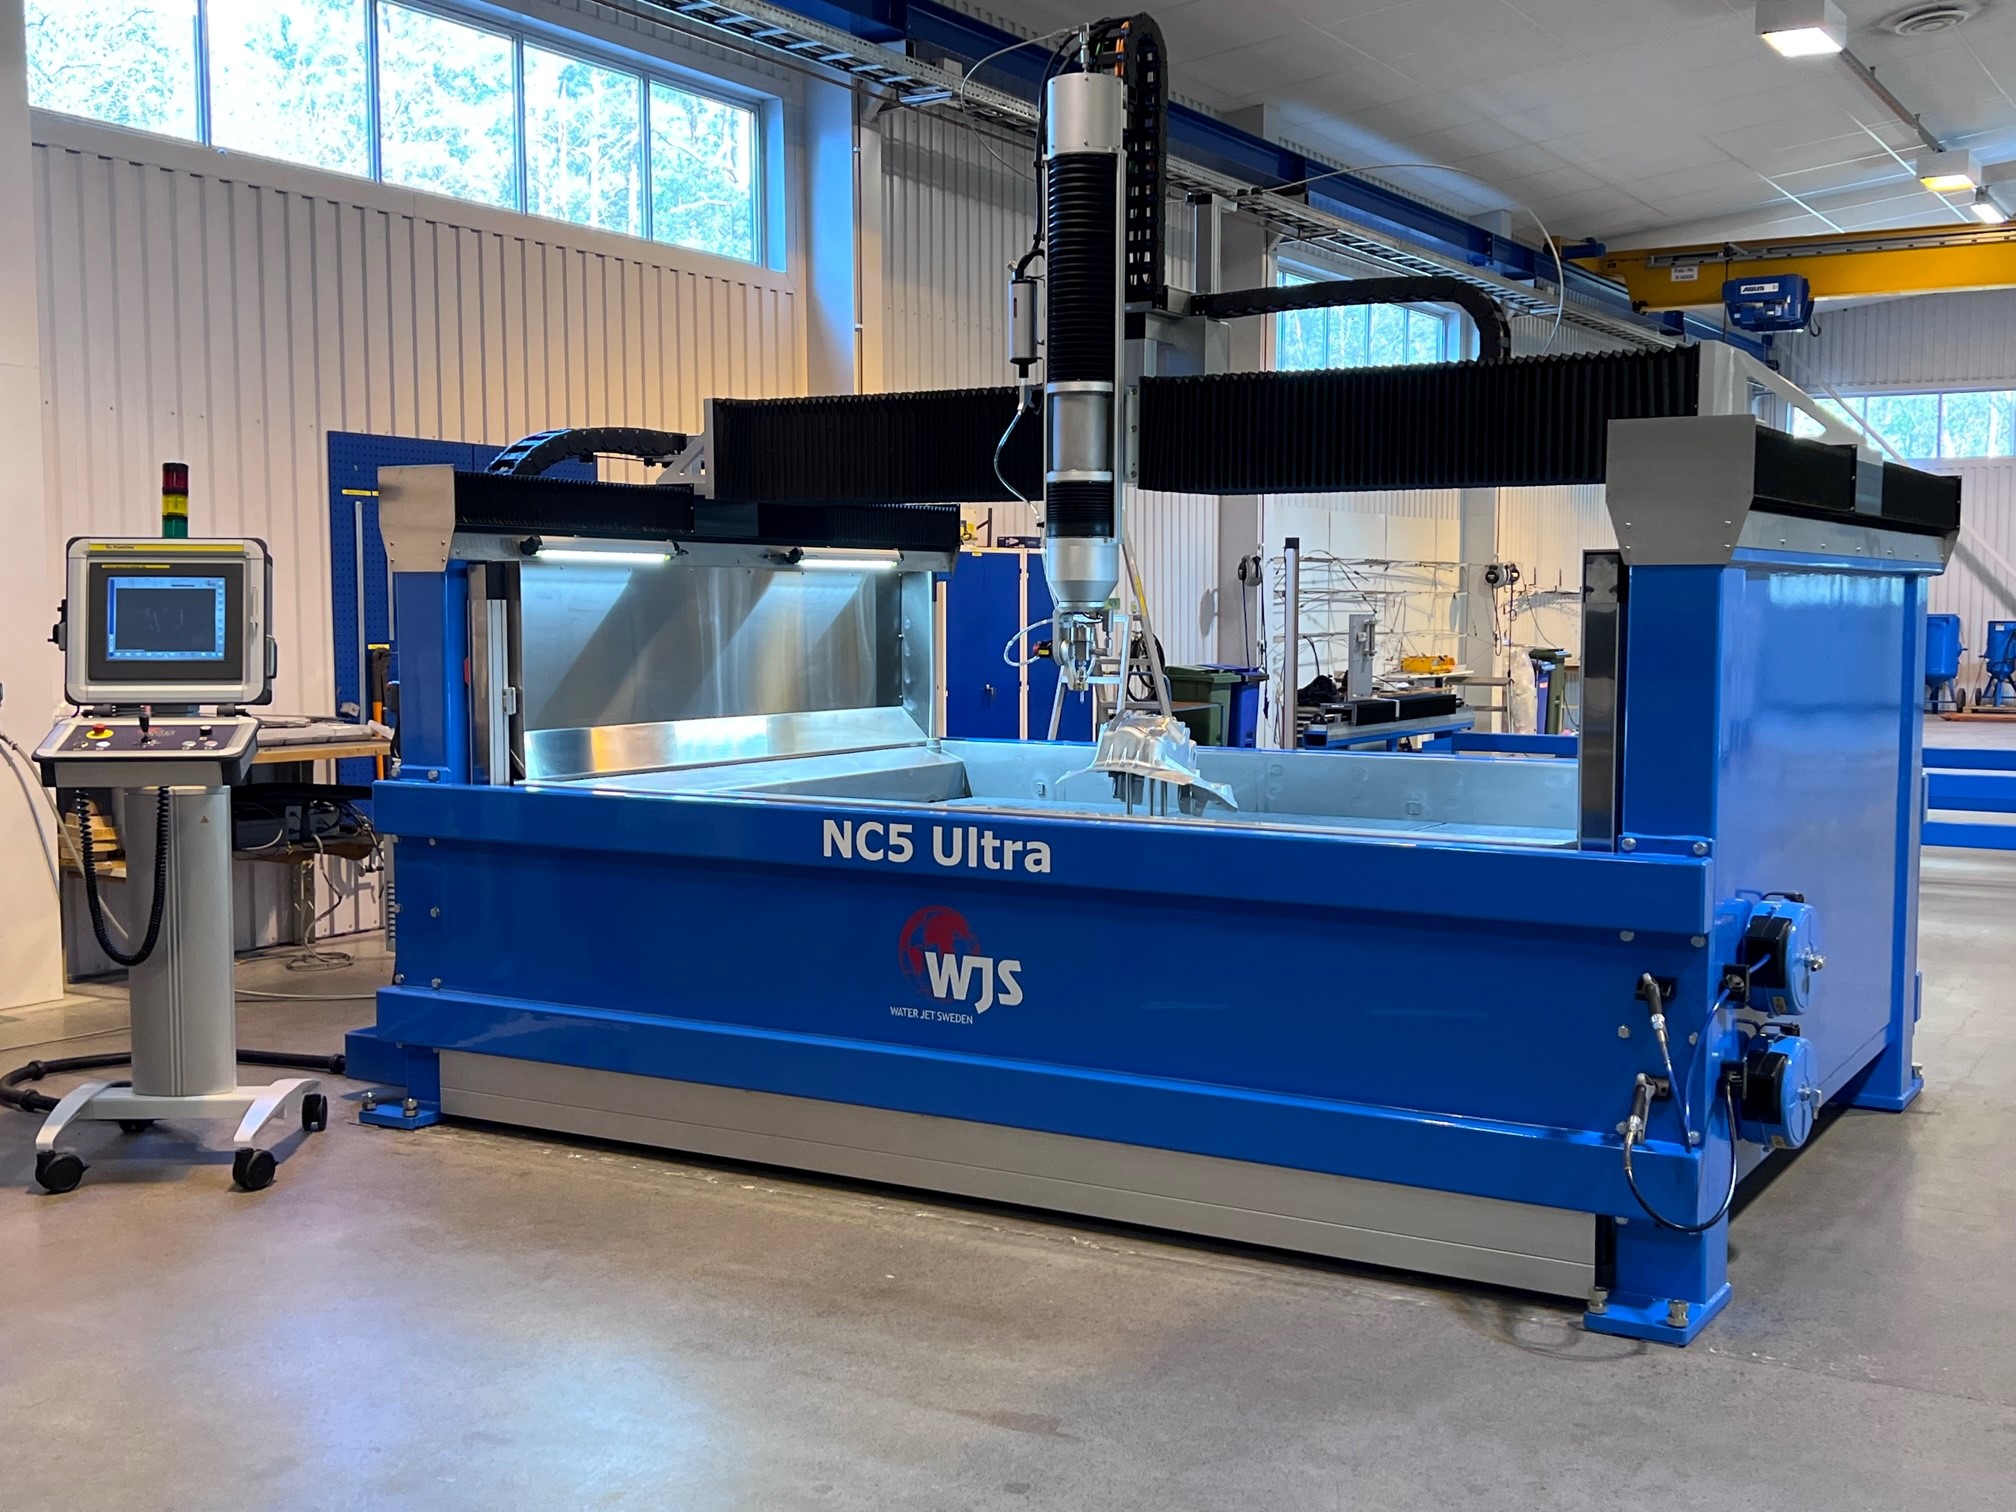 The NC5 Ultra is a compact and slimmer version of the large FiveX 3-D cutting machine. © Waterjet Sweden